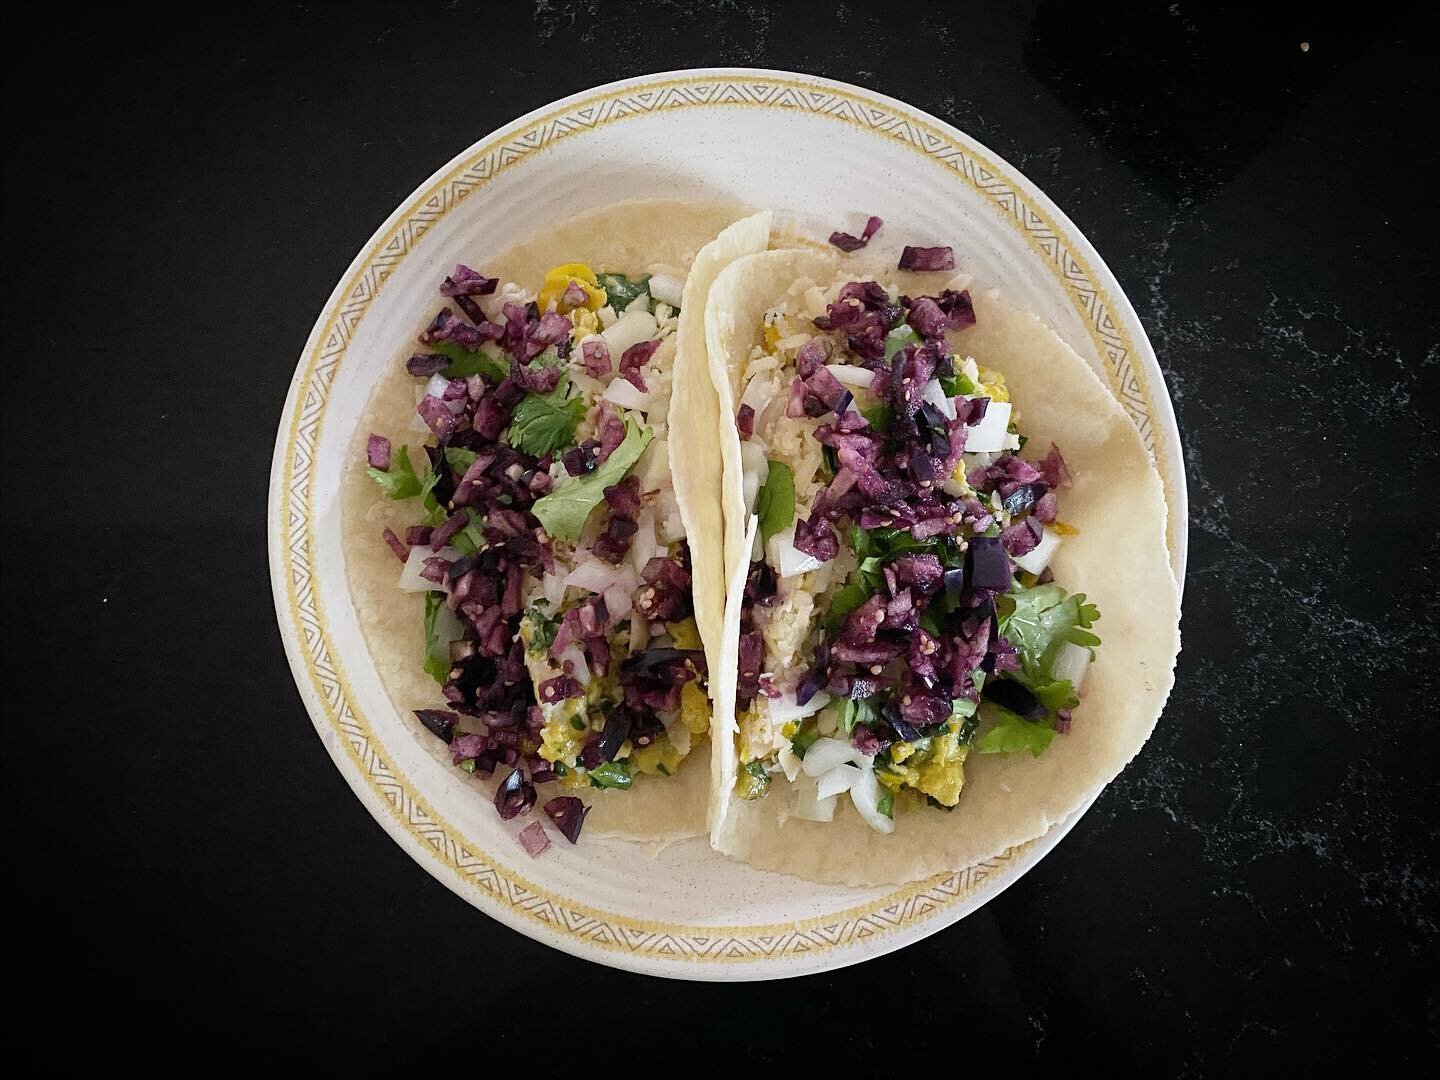 Breakfast tacos filled with things we grew literally in our backyard. Eggs from our hens, with turnip greens, onions, garlic, and purple tomatillos - all from our garden.

Dang, that&rsquo;s a good feeling. I think I&rsquo;m going to chase that high 